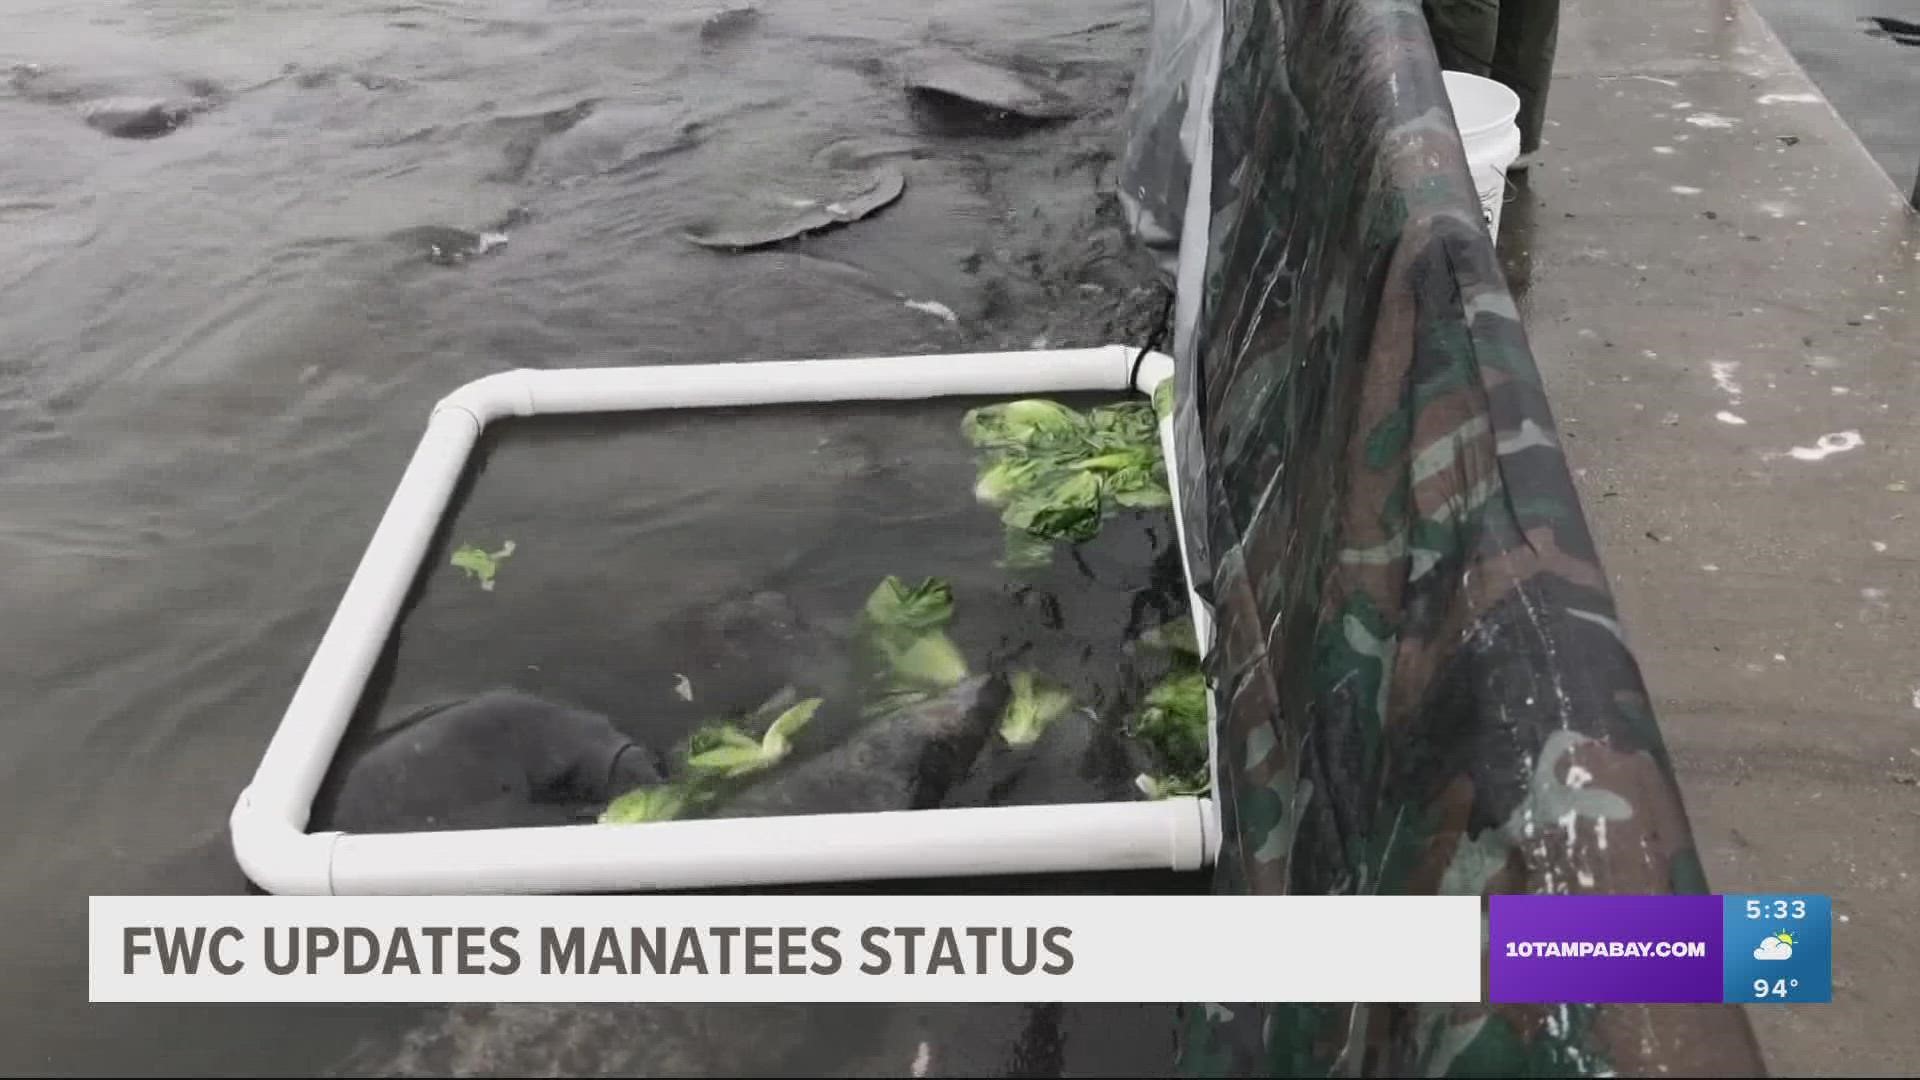 The FWC is urging anybody who sees a manatee in distress to call 1-888-404-3922.